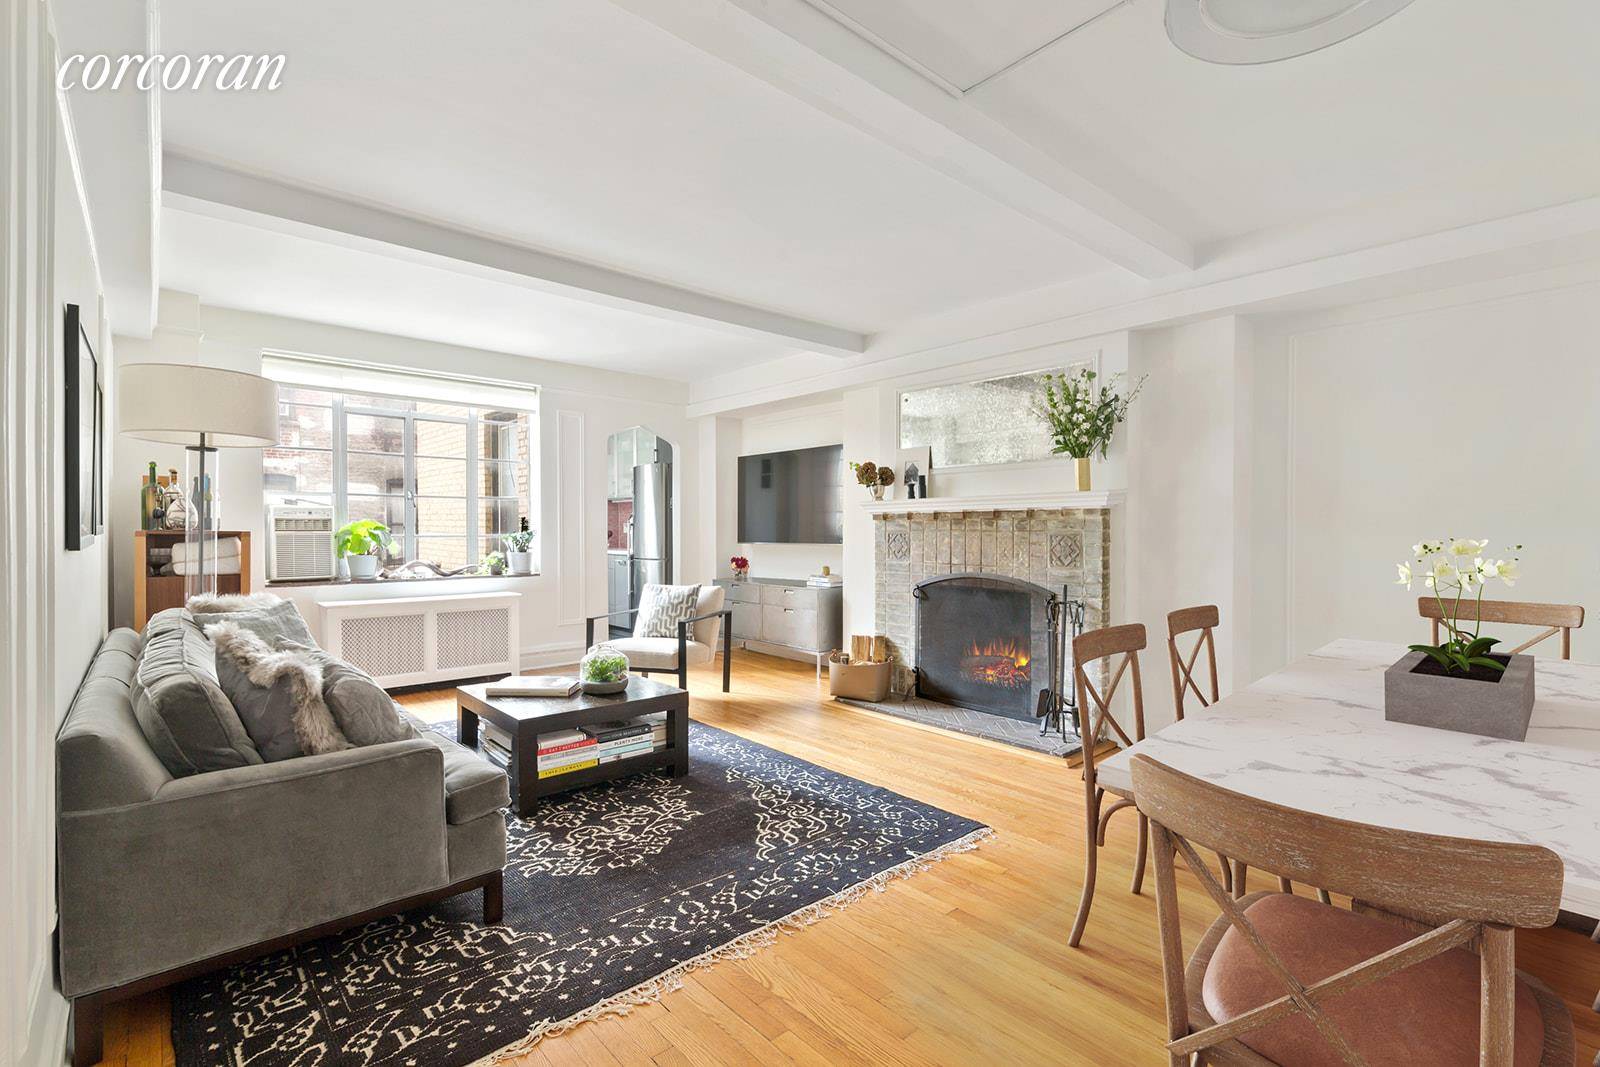 Located on one of the most desirable blocks in the city, this chic, bright and airy, pin drop quiet, one bedroom, one bathroom apartment has been beautifully renovated and incredibly ...